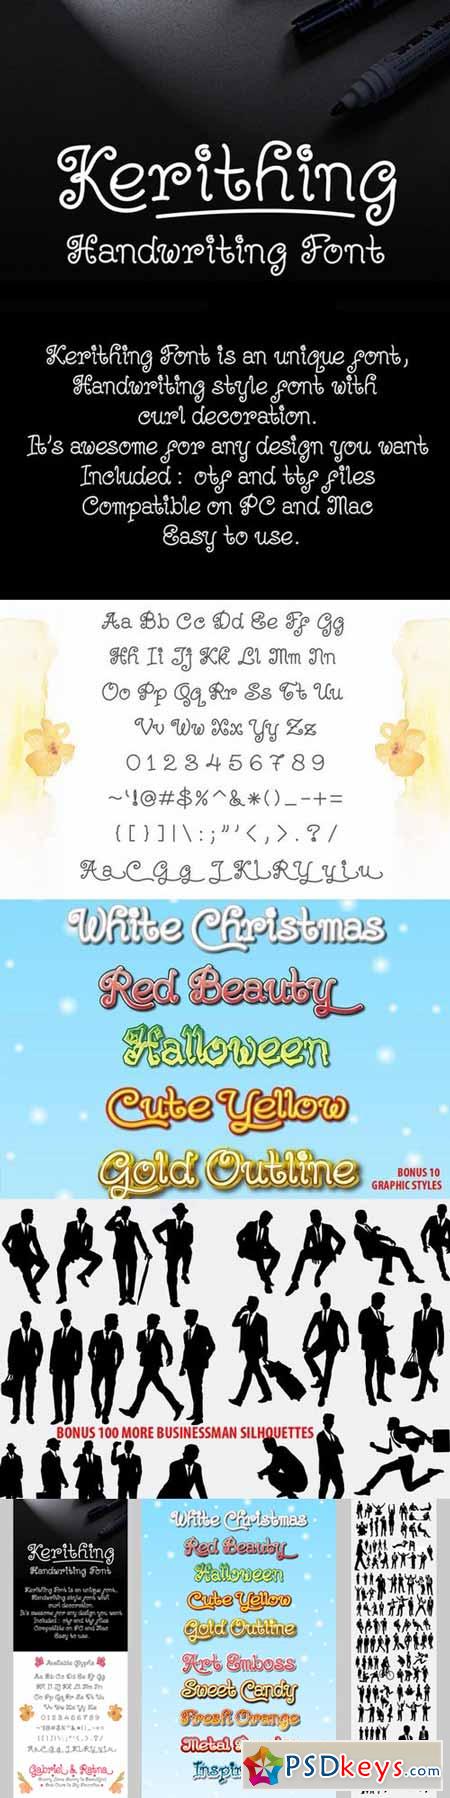 Kerithing Font+Styles+Silhouettes 454430